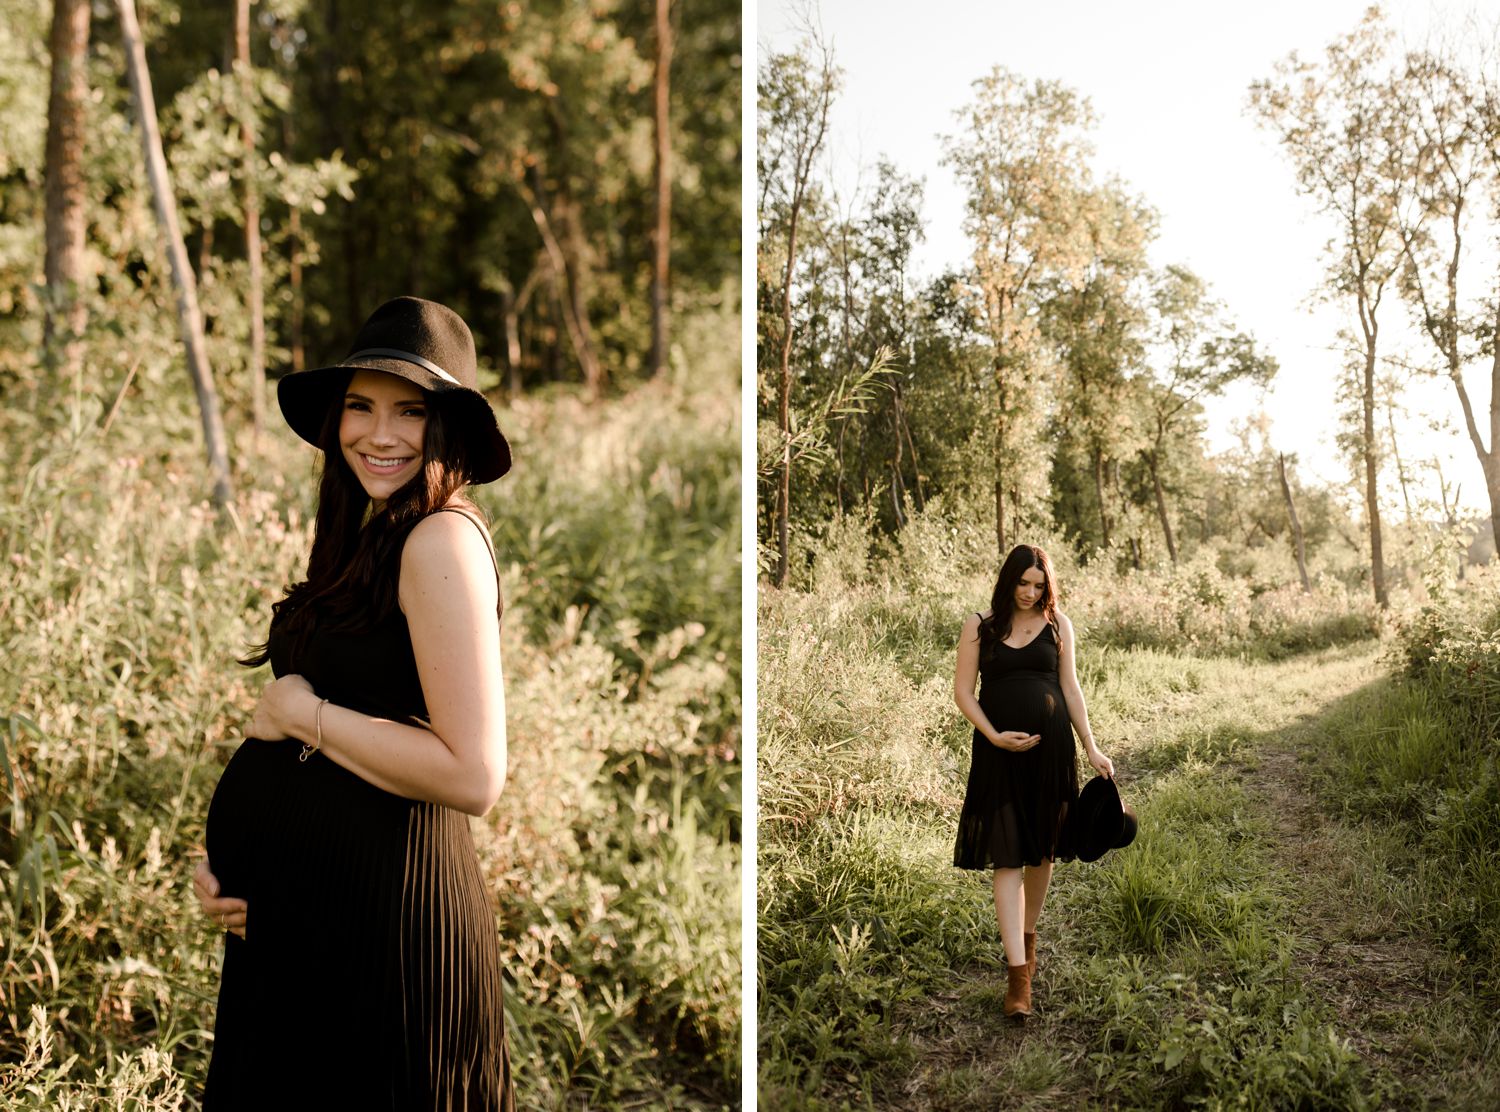 Manitoba maternity session & proposal, photographed by Vanessa Renae, a winnipeg wedding and elopement photographer